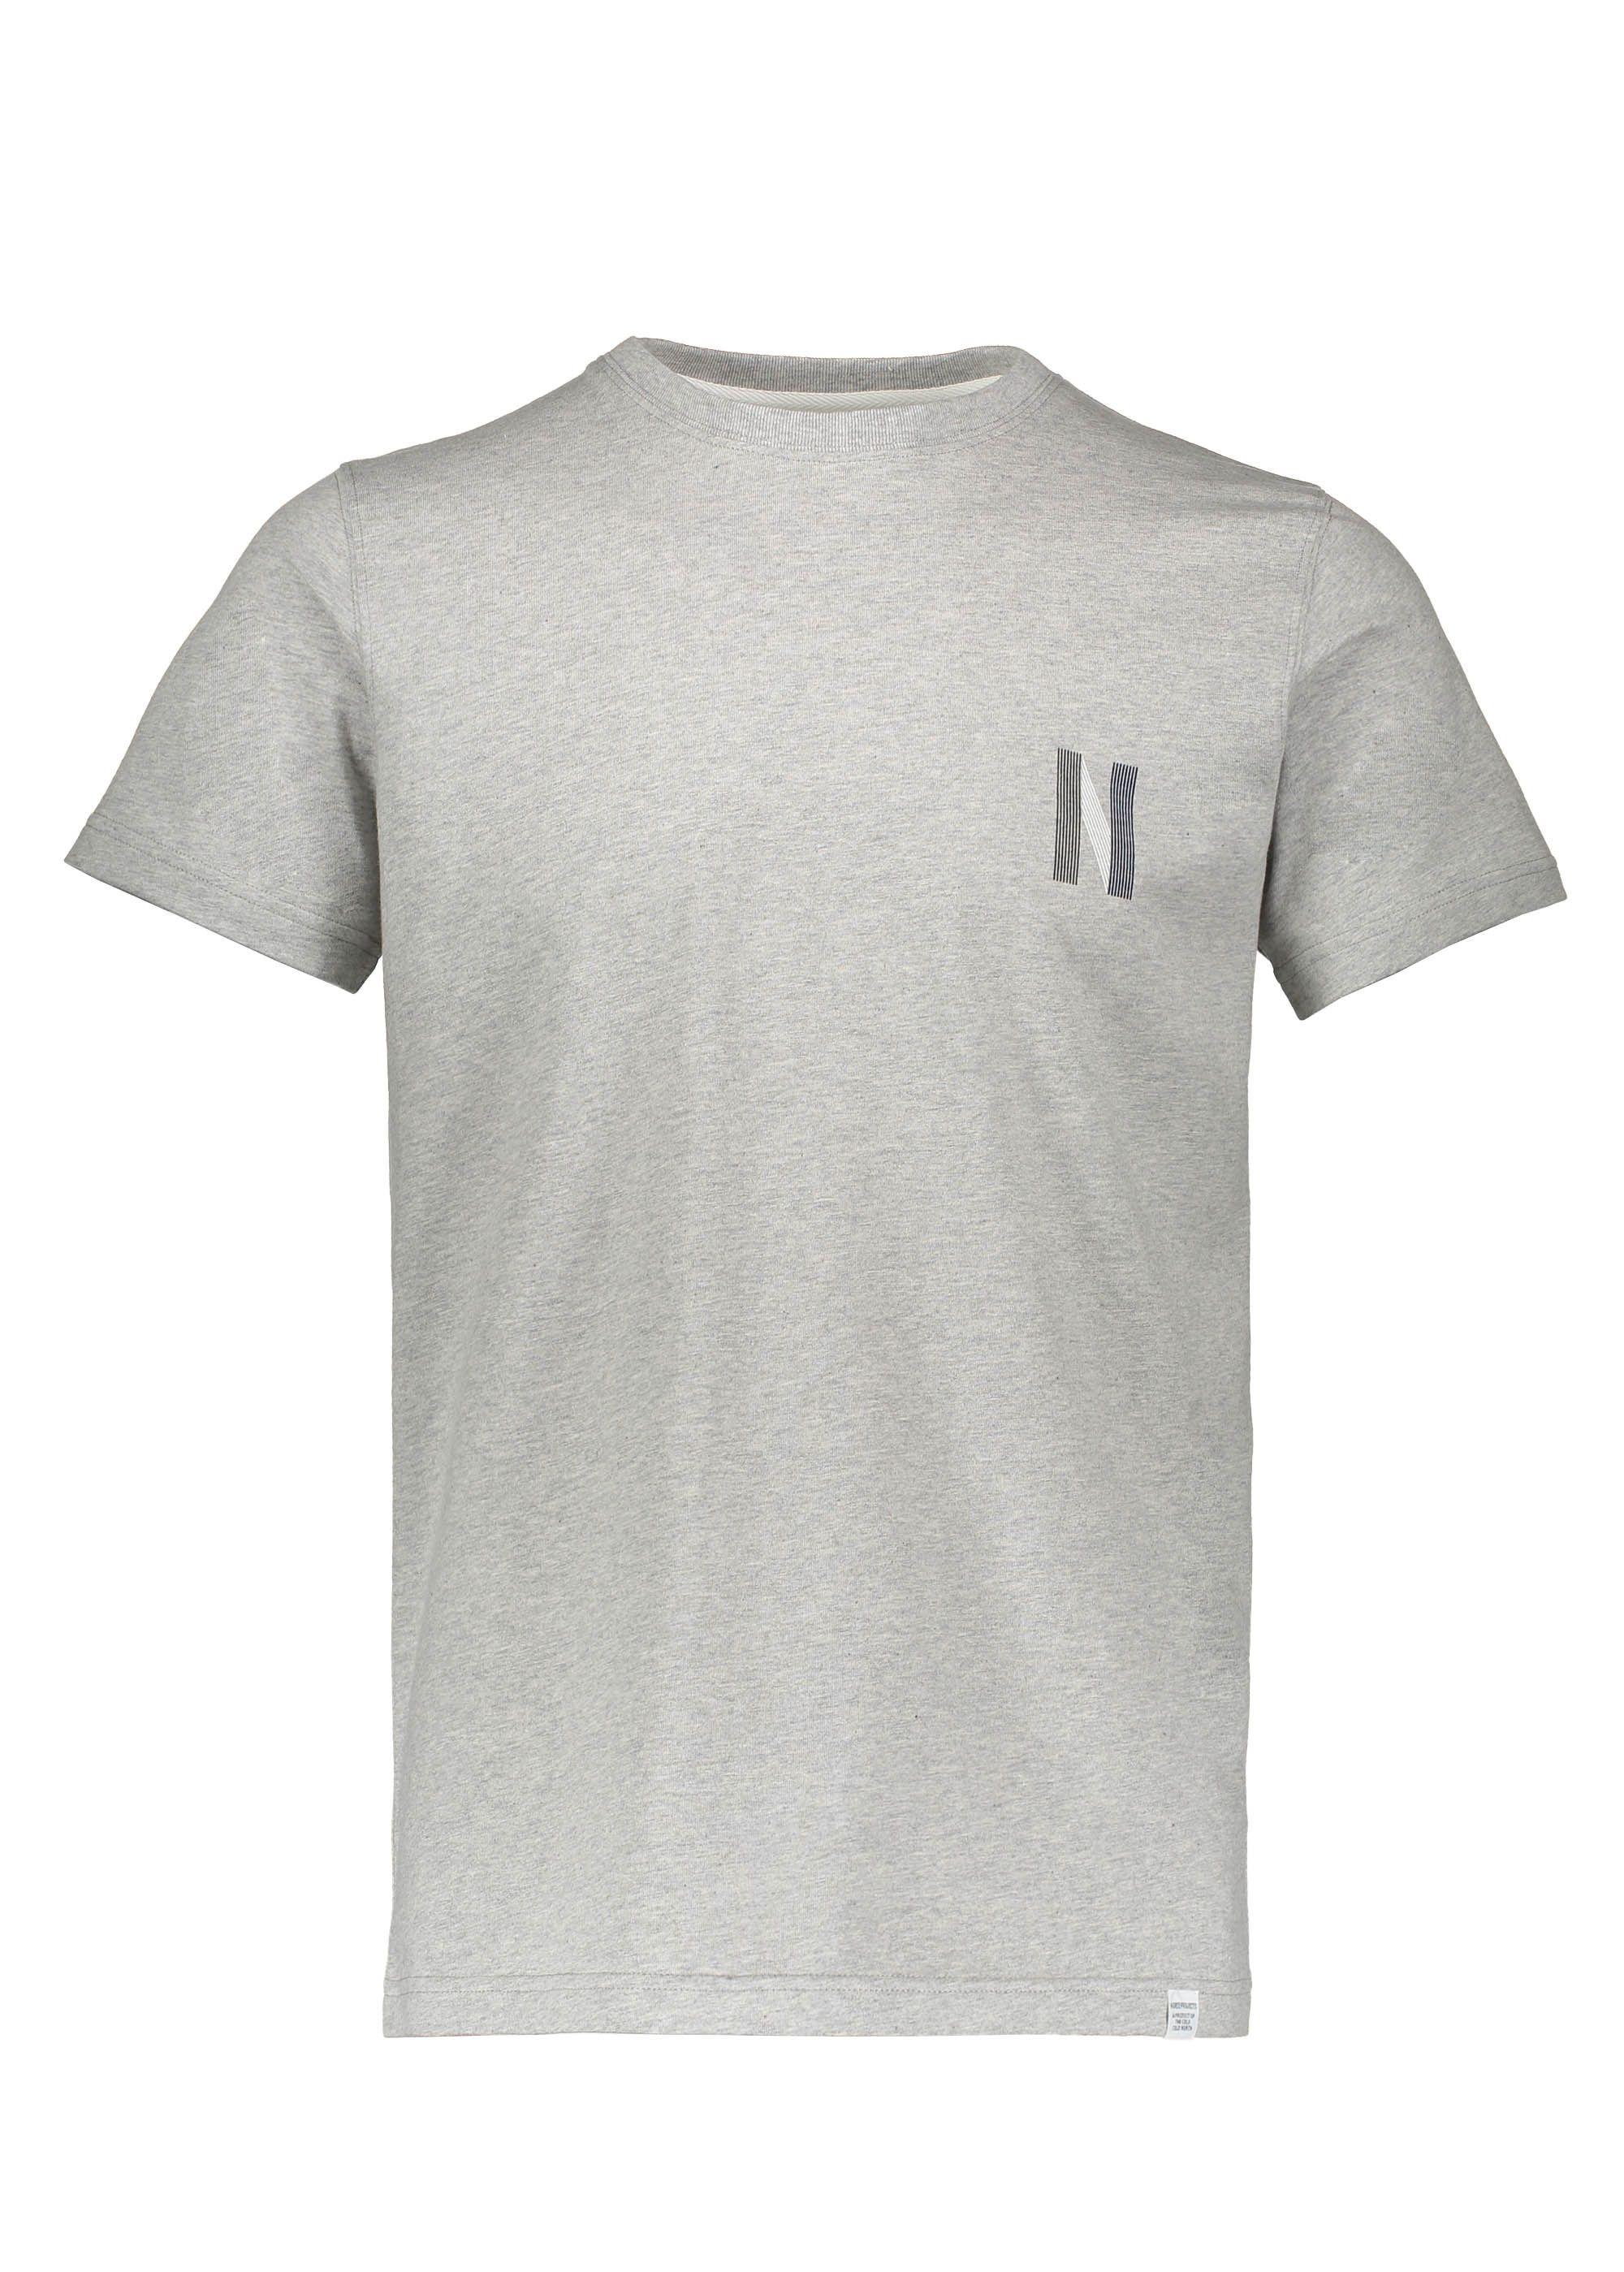 Light Grey Logo - Norse Projects Niels Multi Logo - Light Grey - T-shirts from Triads UK